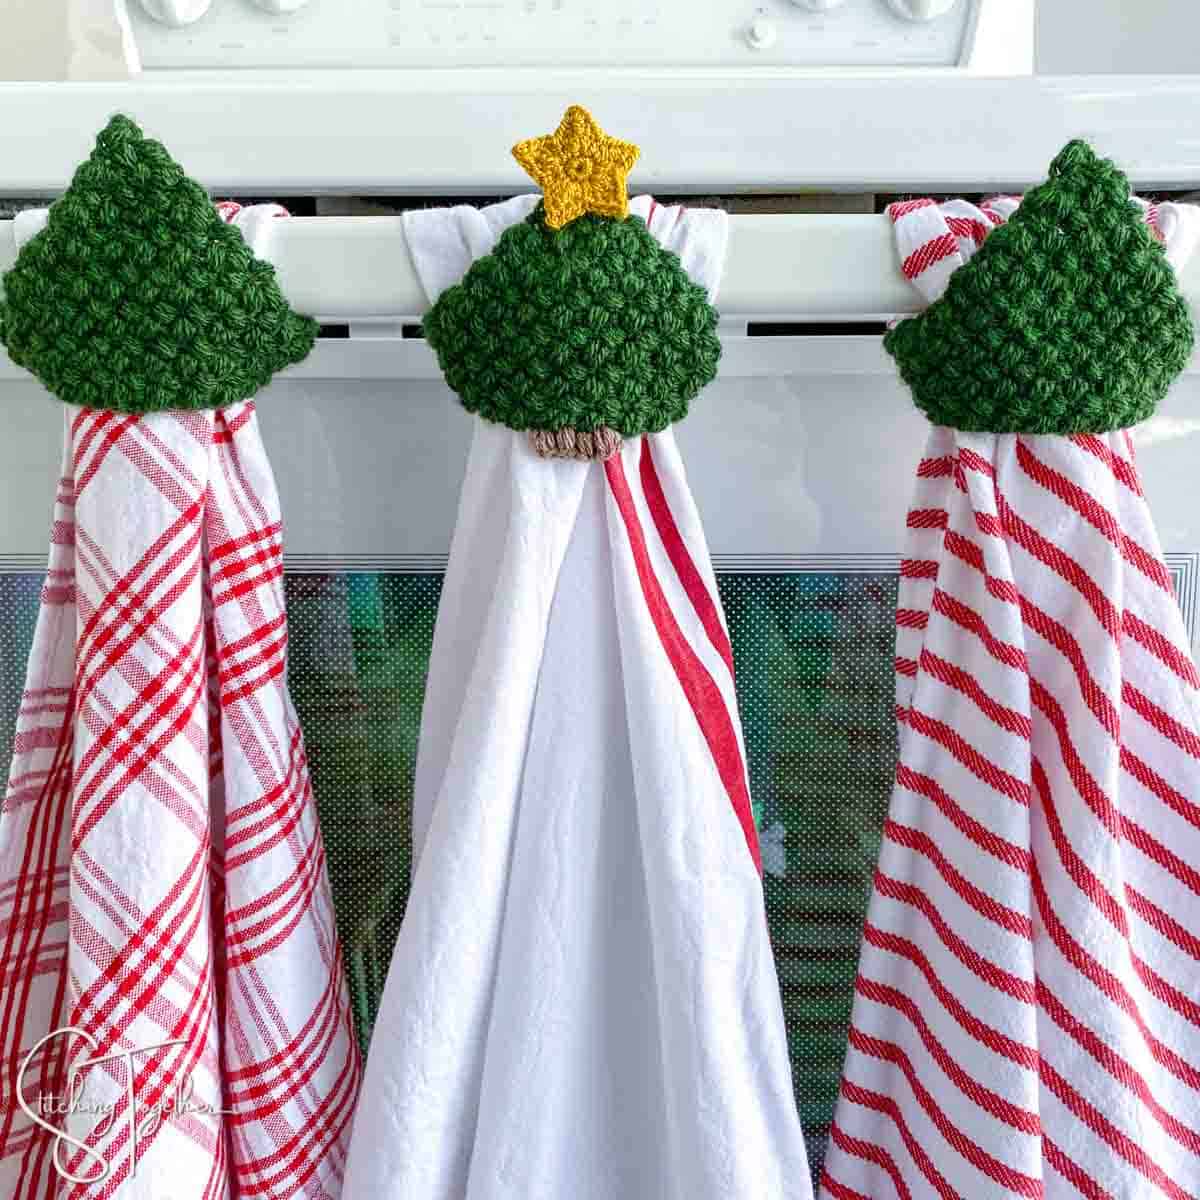 3 hanging Christmas dishtowels with crochet tree toppers